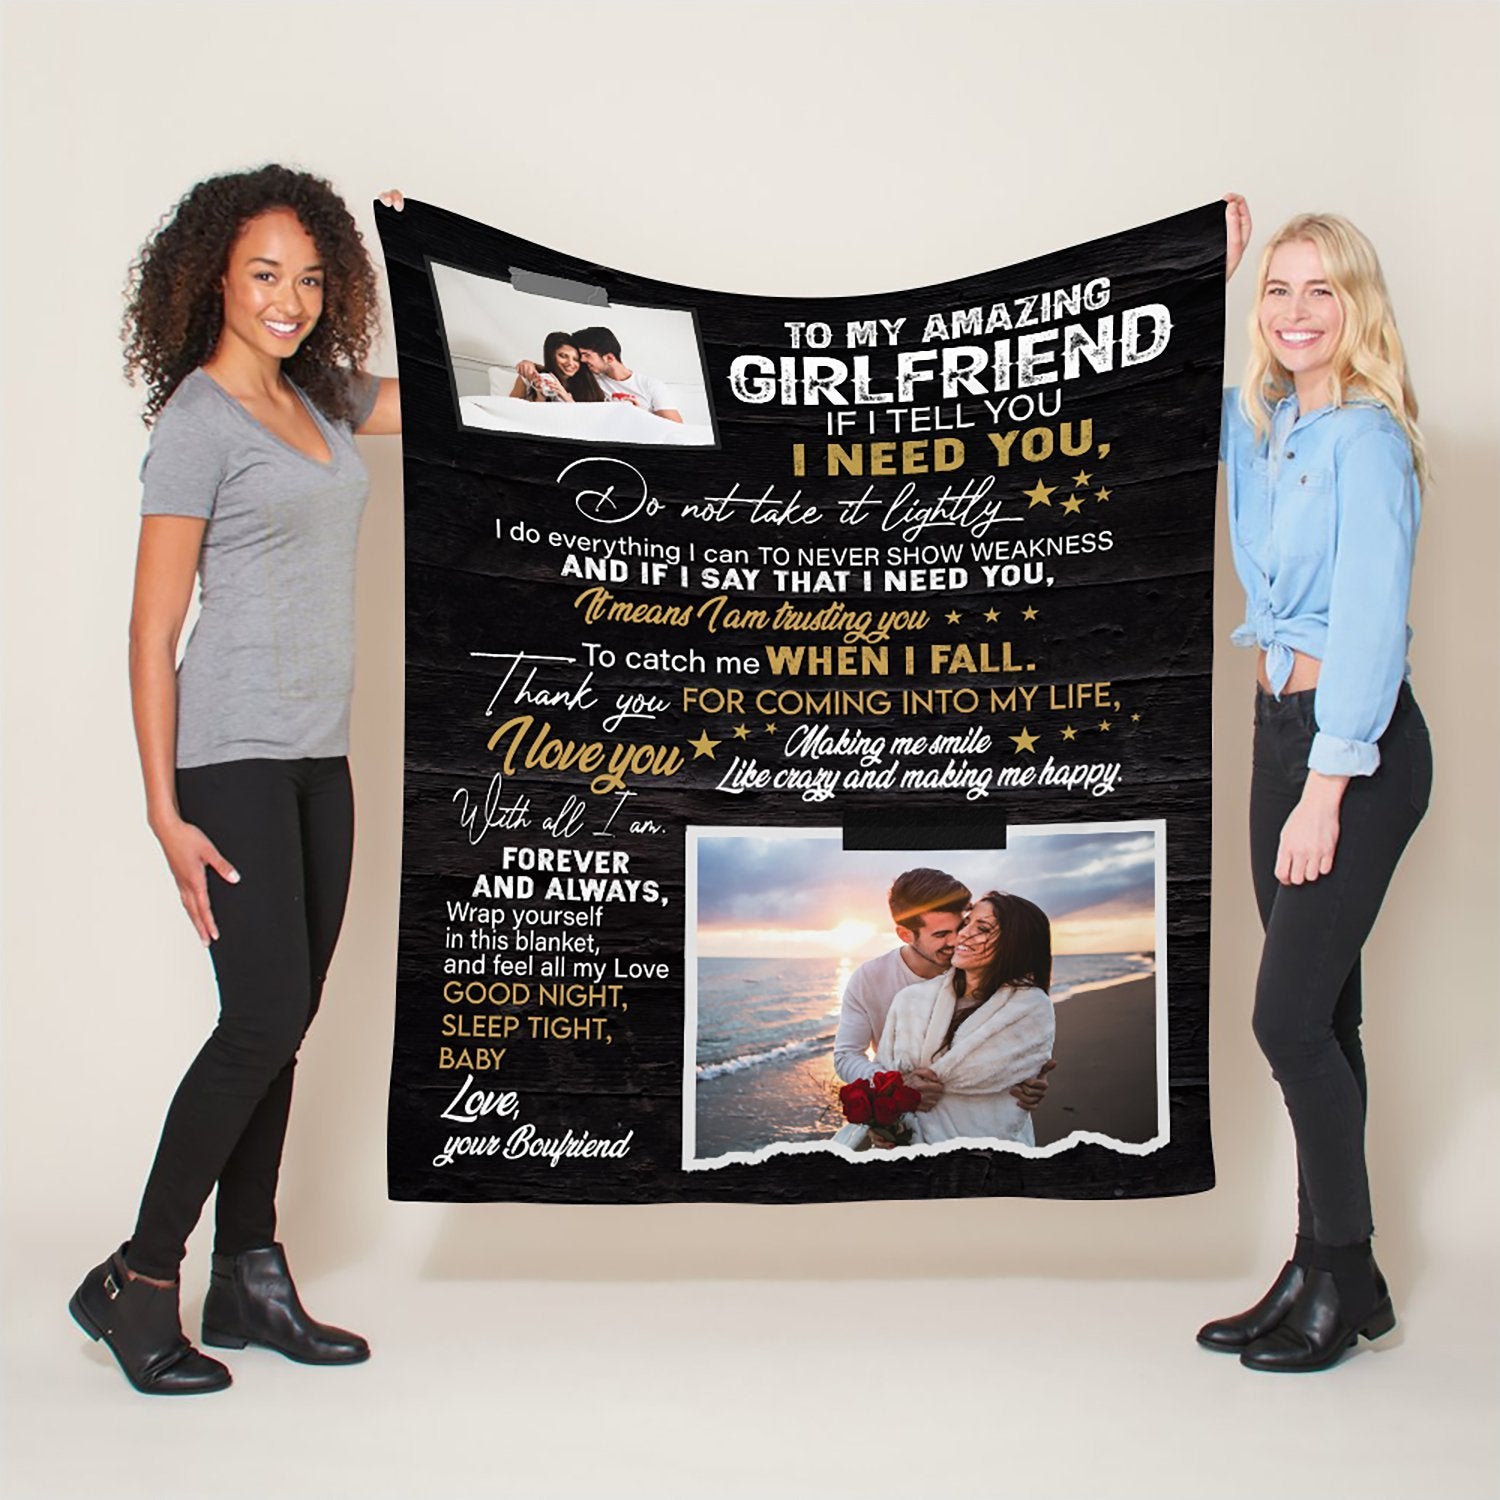 Love Letter Blanket For Girlfriend That can be customized with Photo And Text